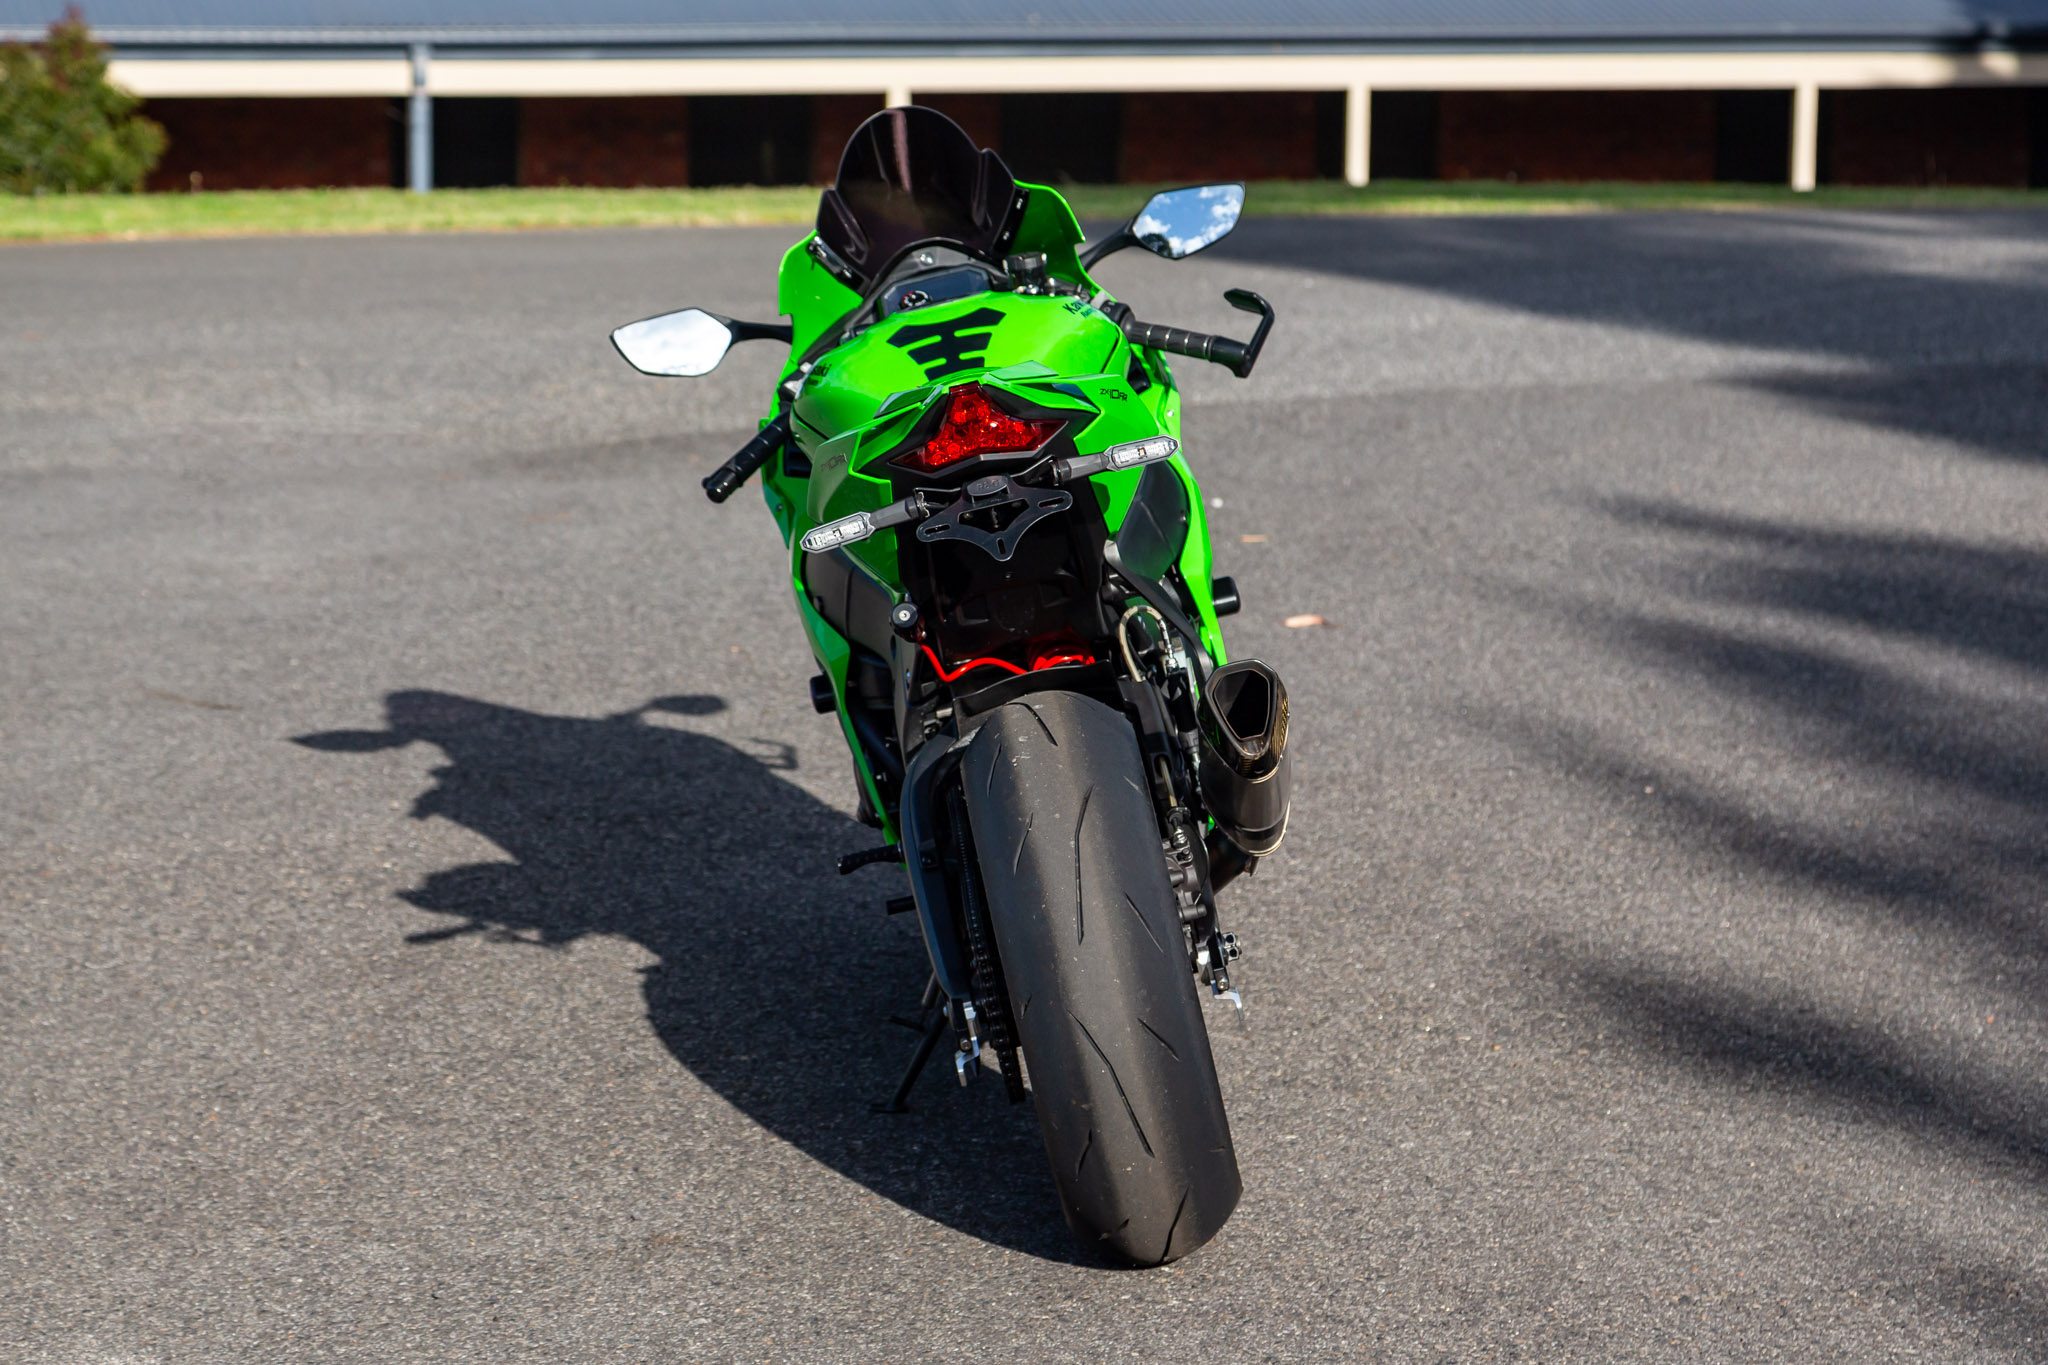 2020 Kawasaki Ninja ZX-10RR for sale by auction in Melbourne, VIC 